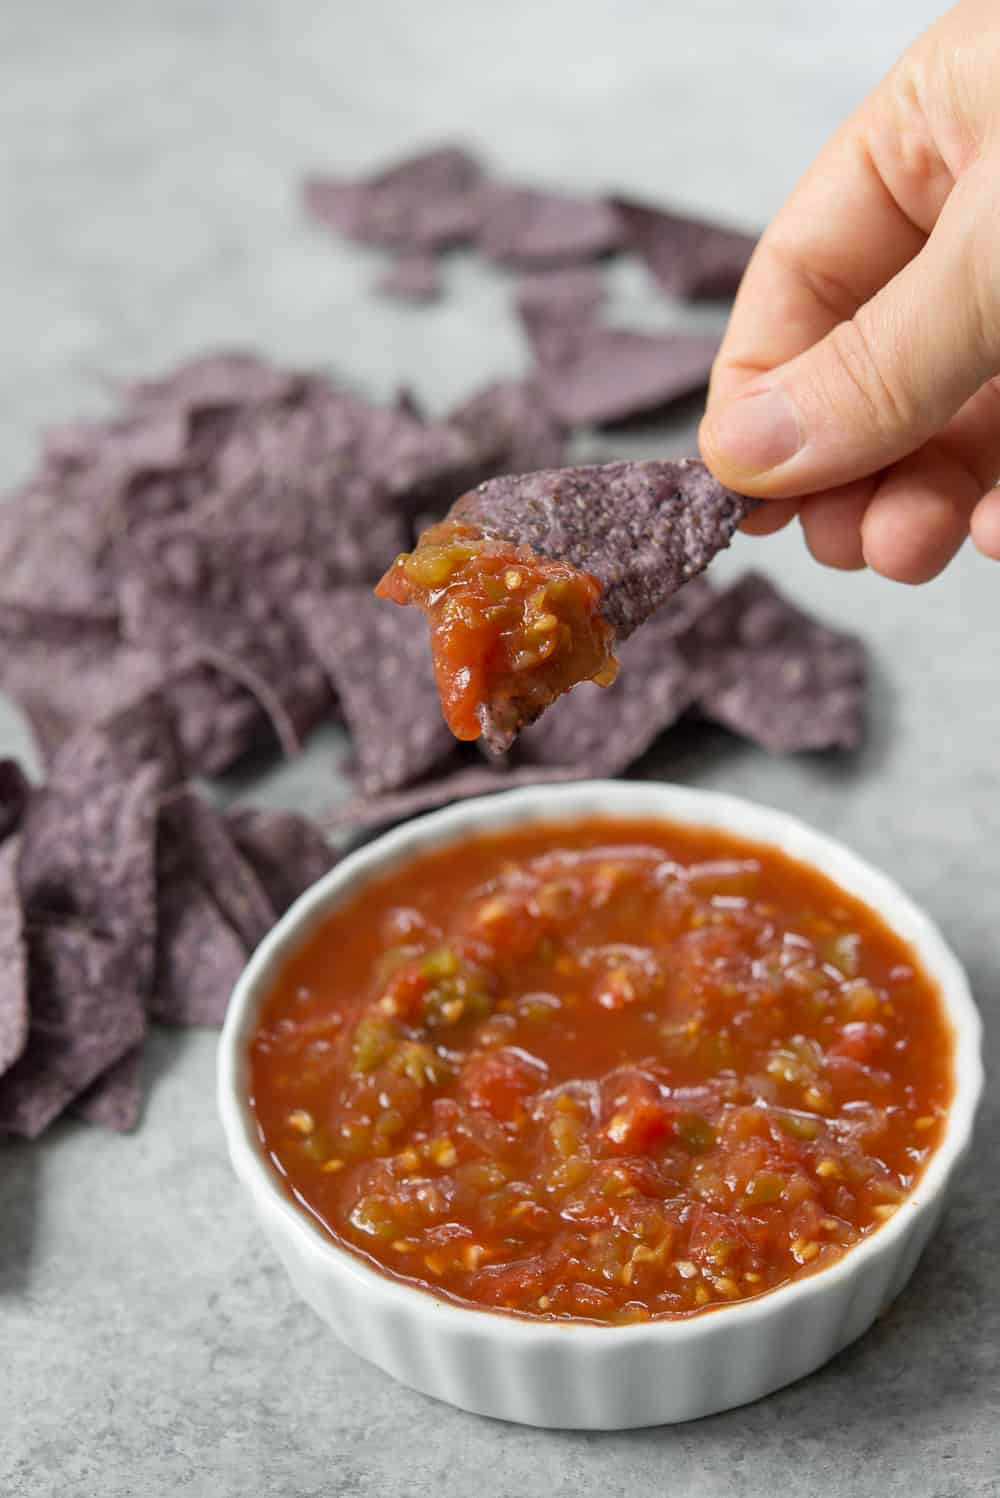 Homemade Salsa Recipe For Canning
 The Best Homemade Salsa for Canning Delish Knowledge